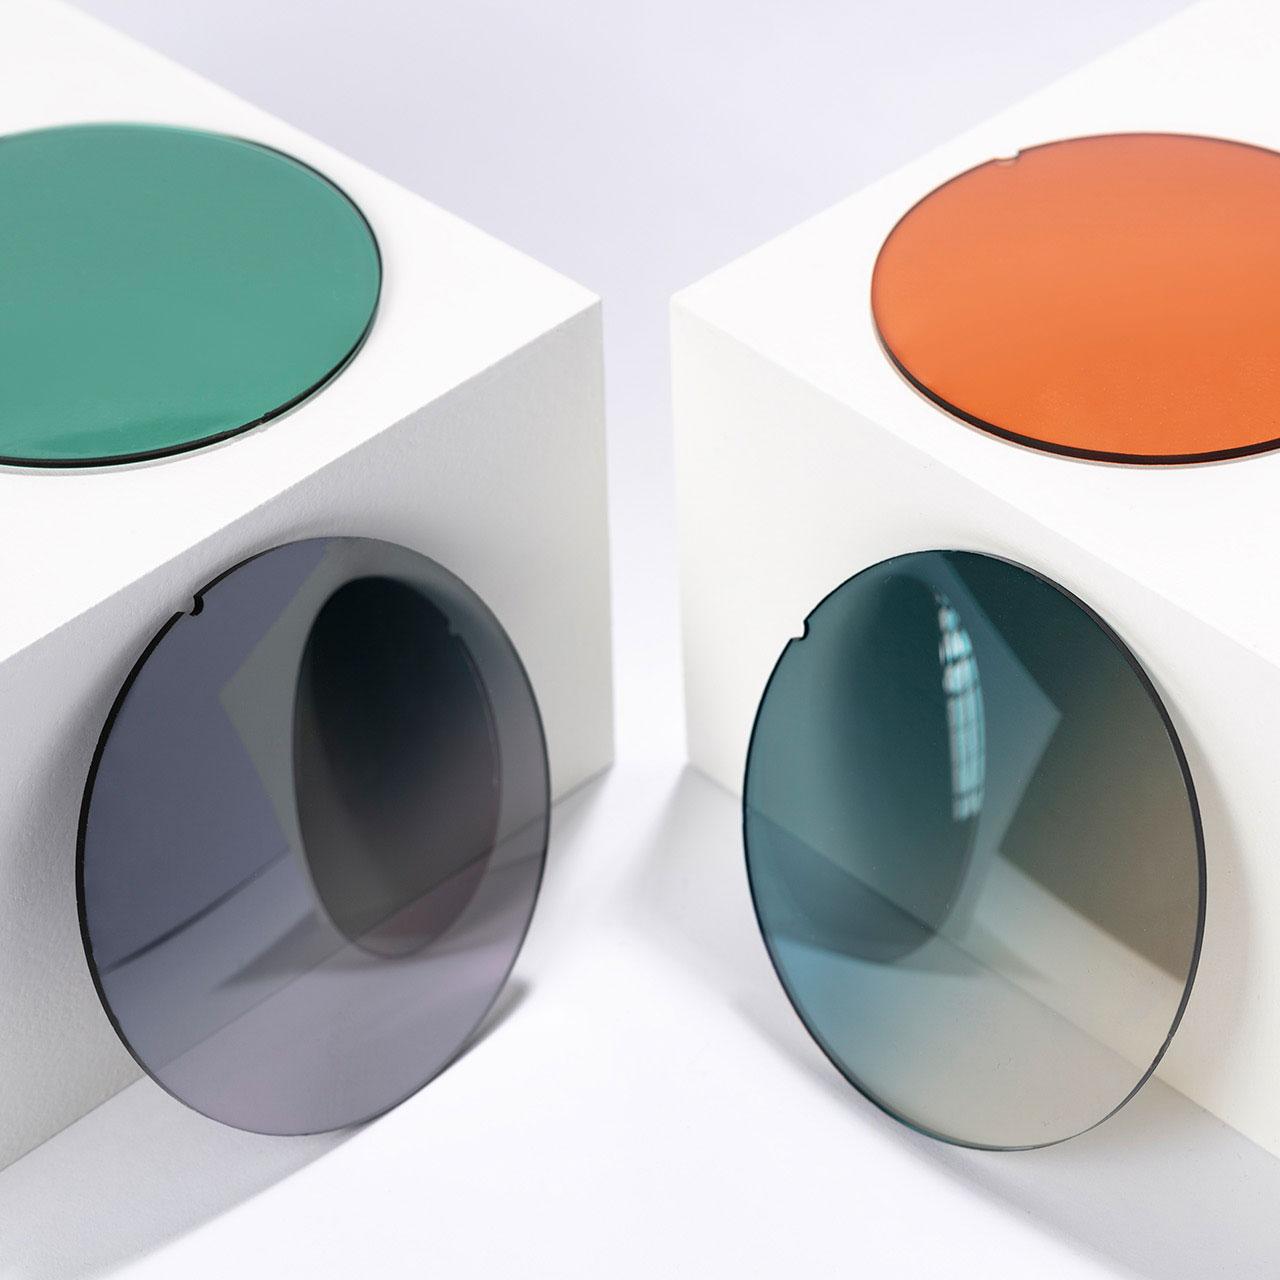 Plano lenses for sun protection